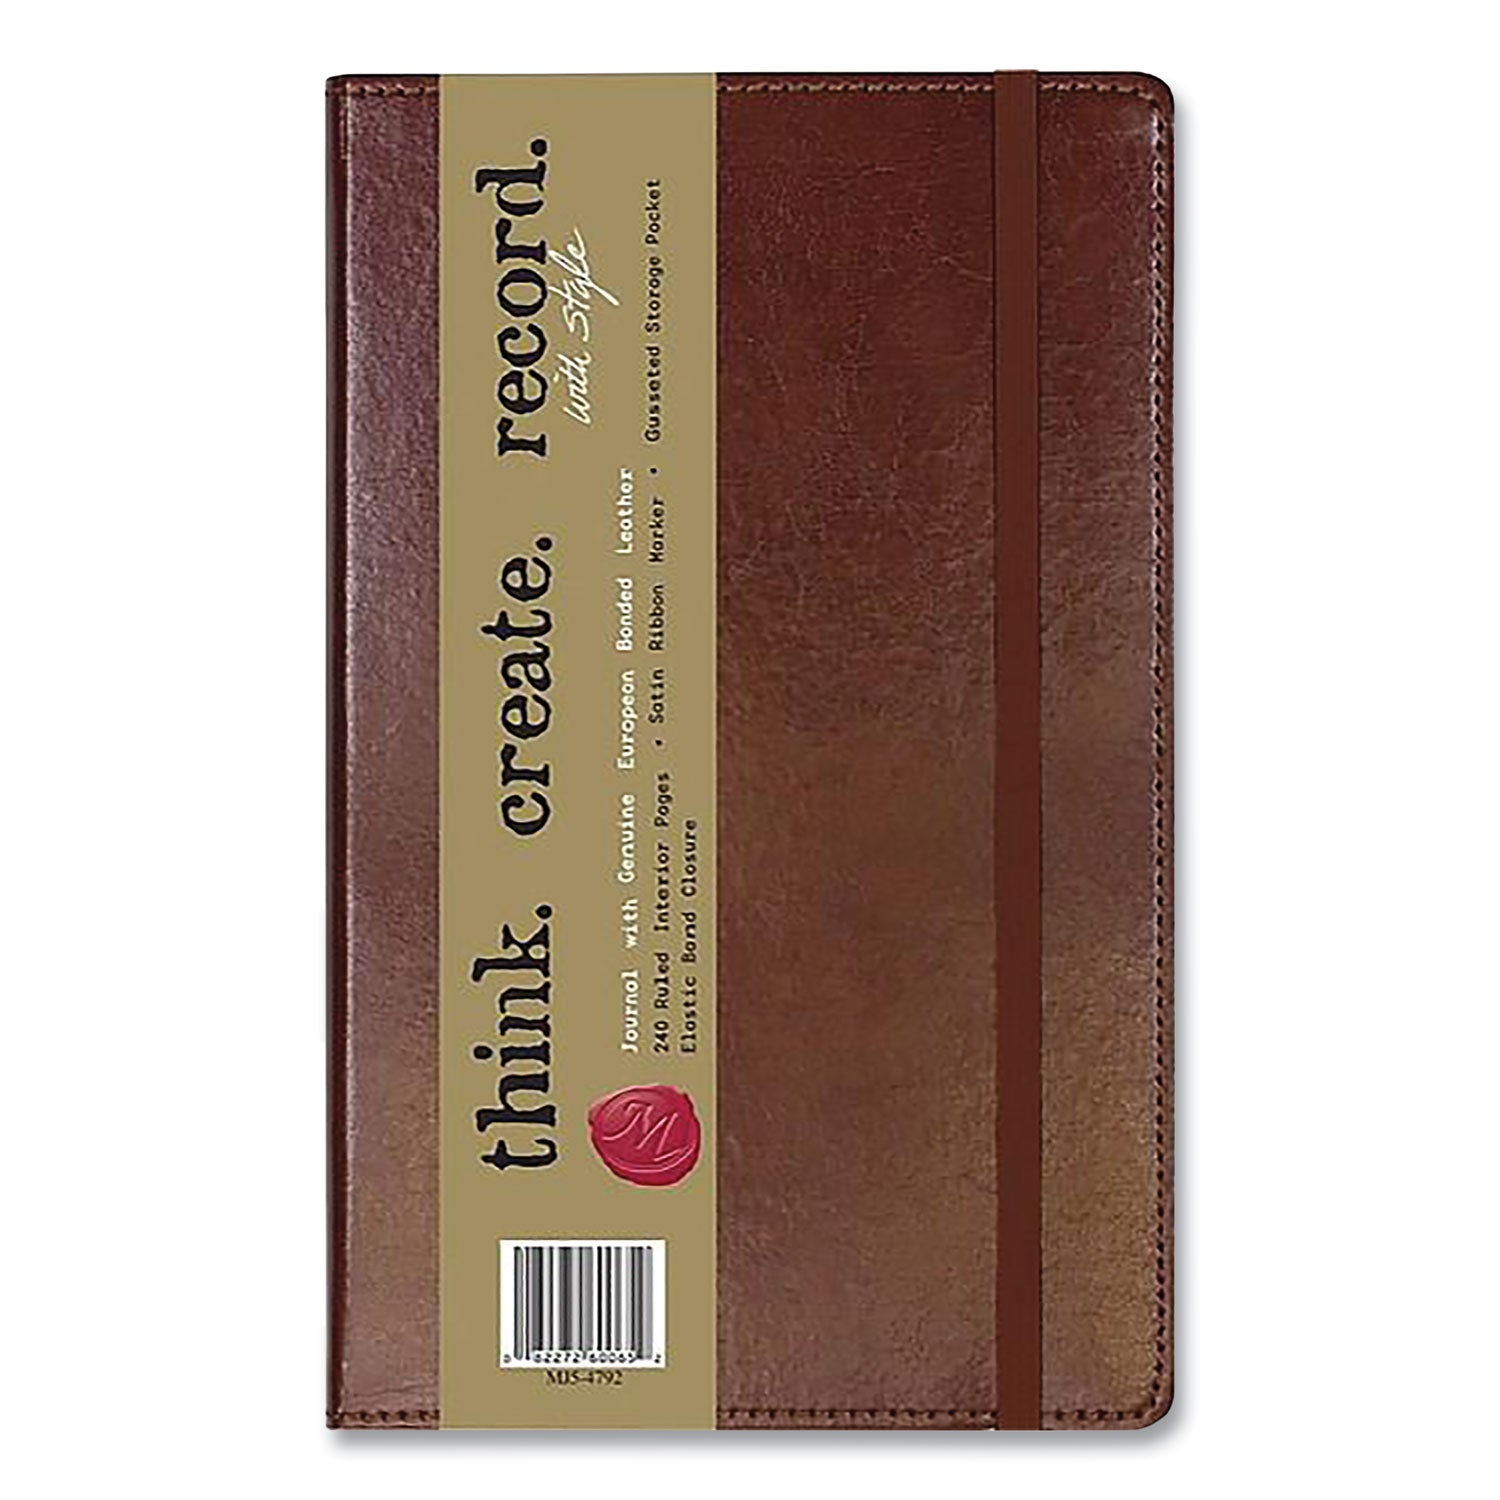 bonded-leather-journal-1-subject-narrow-rule-brown-cover-240-825-x-5-sheets_cgbmj54792 - 5